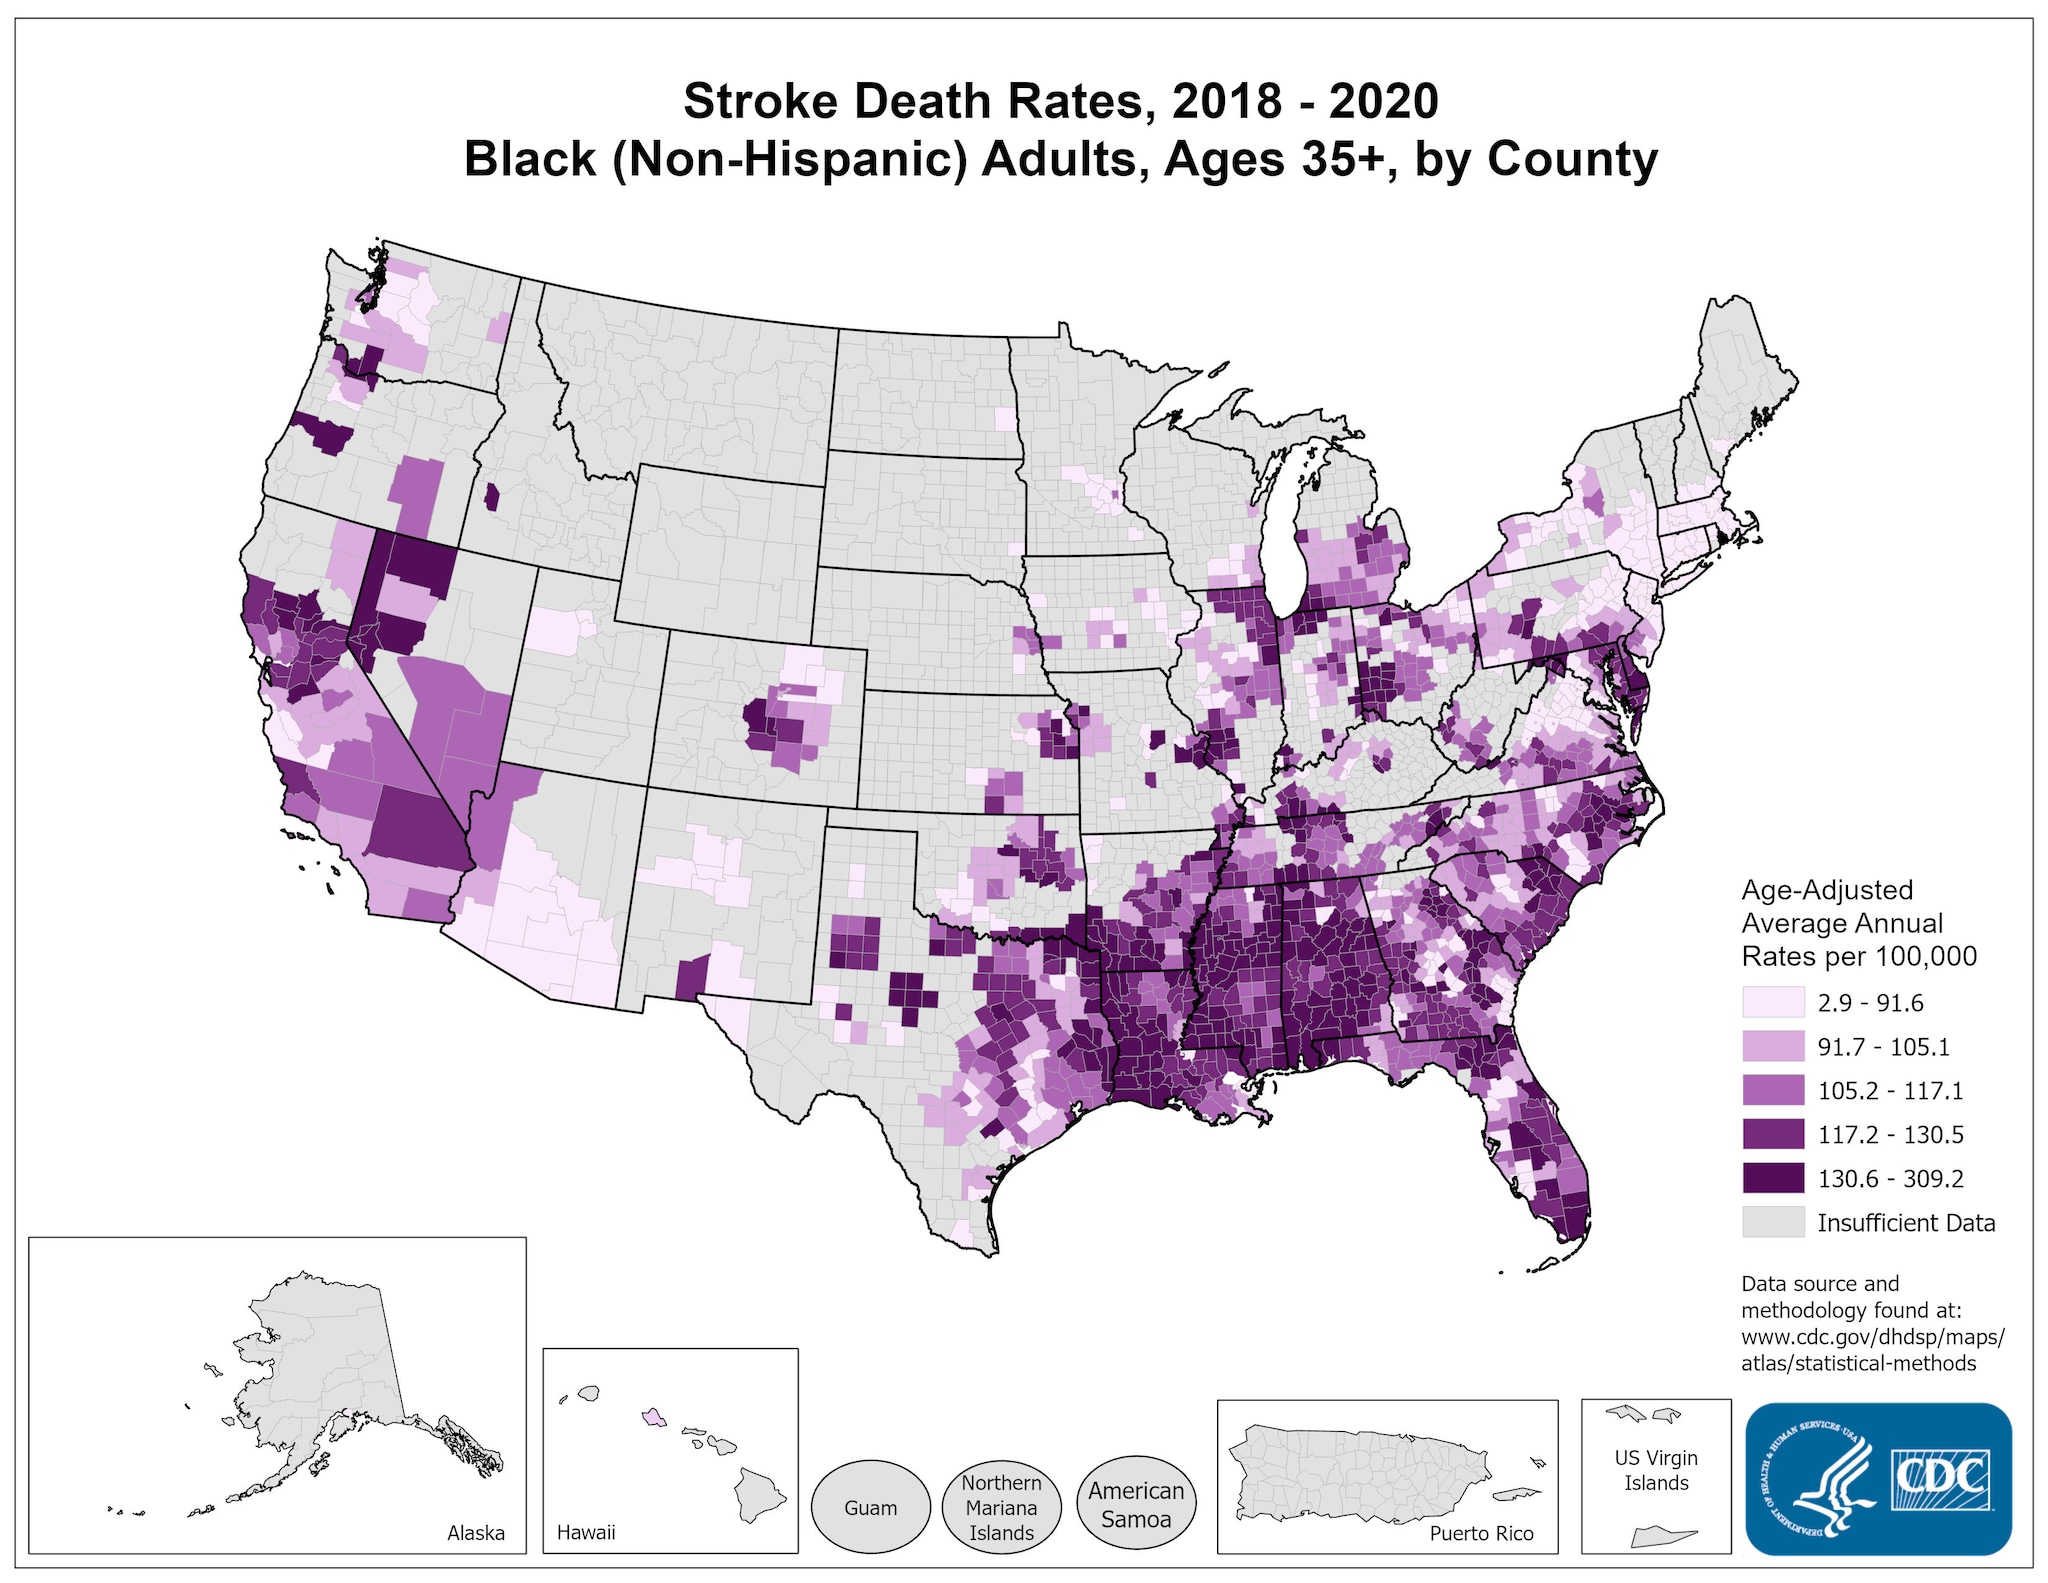 Stroke Death Rates for 2018 through 2020 for Blacks Aged 35 Years and Older by County